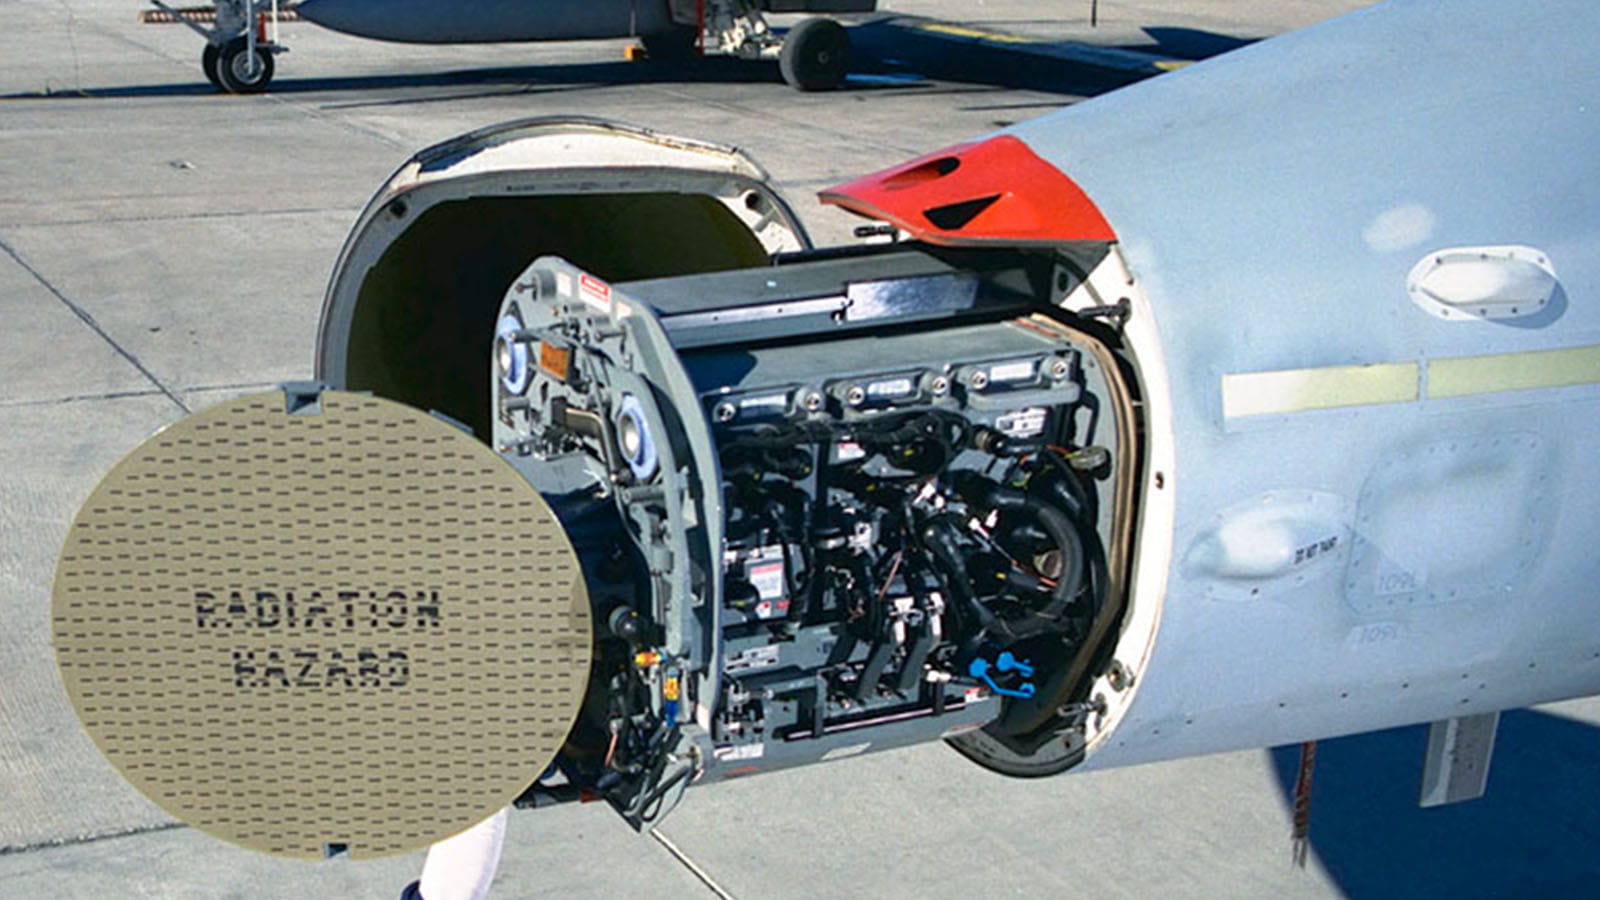 An APG-73 fire control radar is installed into an F/A-18 Hornet. The radome swings open and the radar glides forward on rails to allow access to the entire system.